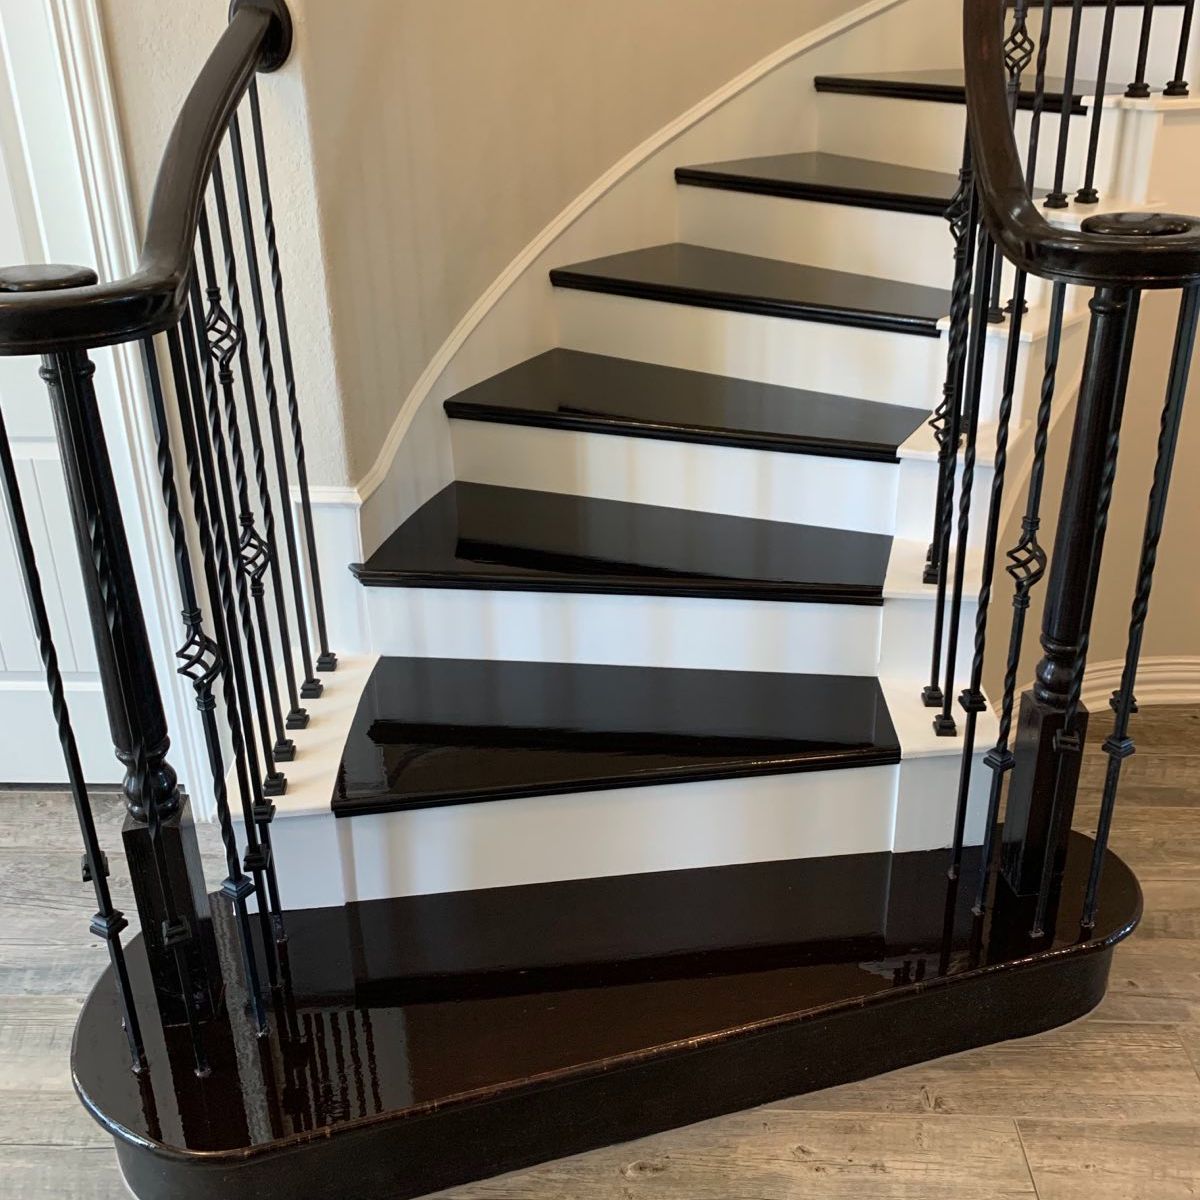 Custom stair installation by Lone Star Custom Woodworks: featuring modern stairs installation, dark wood install, craftsman railings, and balusters.